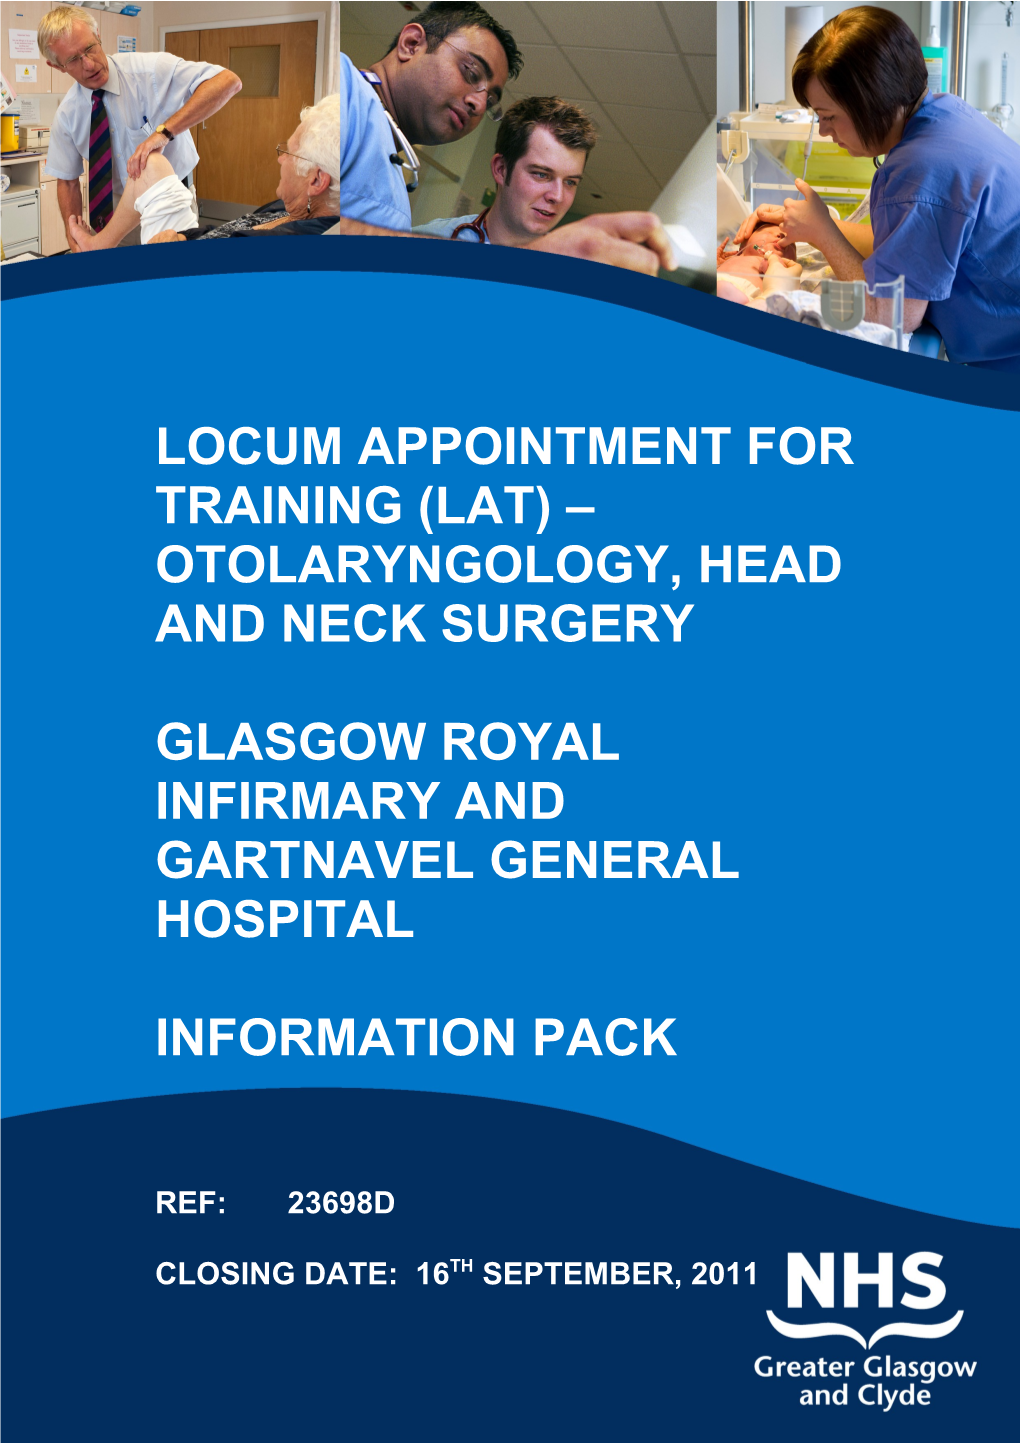 Locum Appointment for Training (Lat) Otolaryngology, Head and Neck Surgery